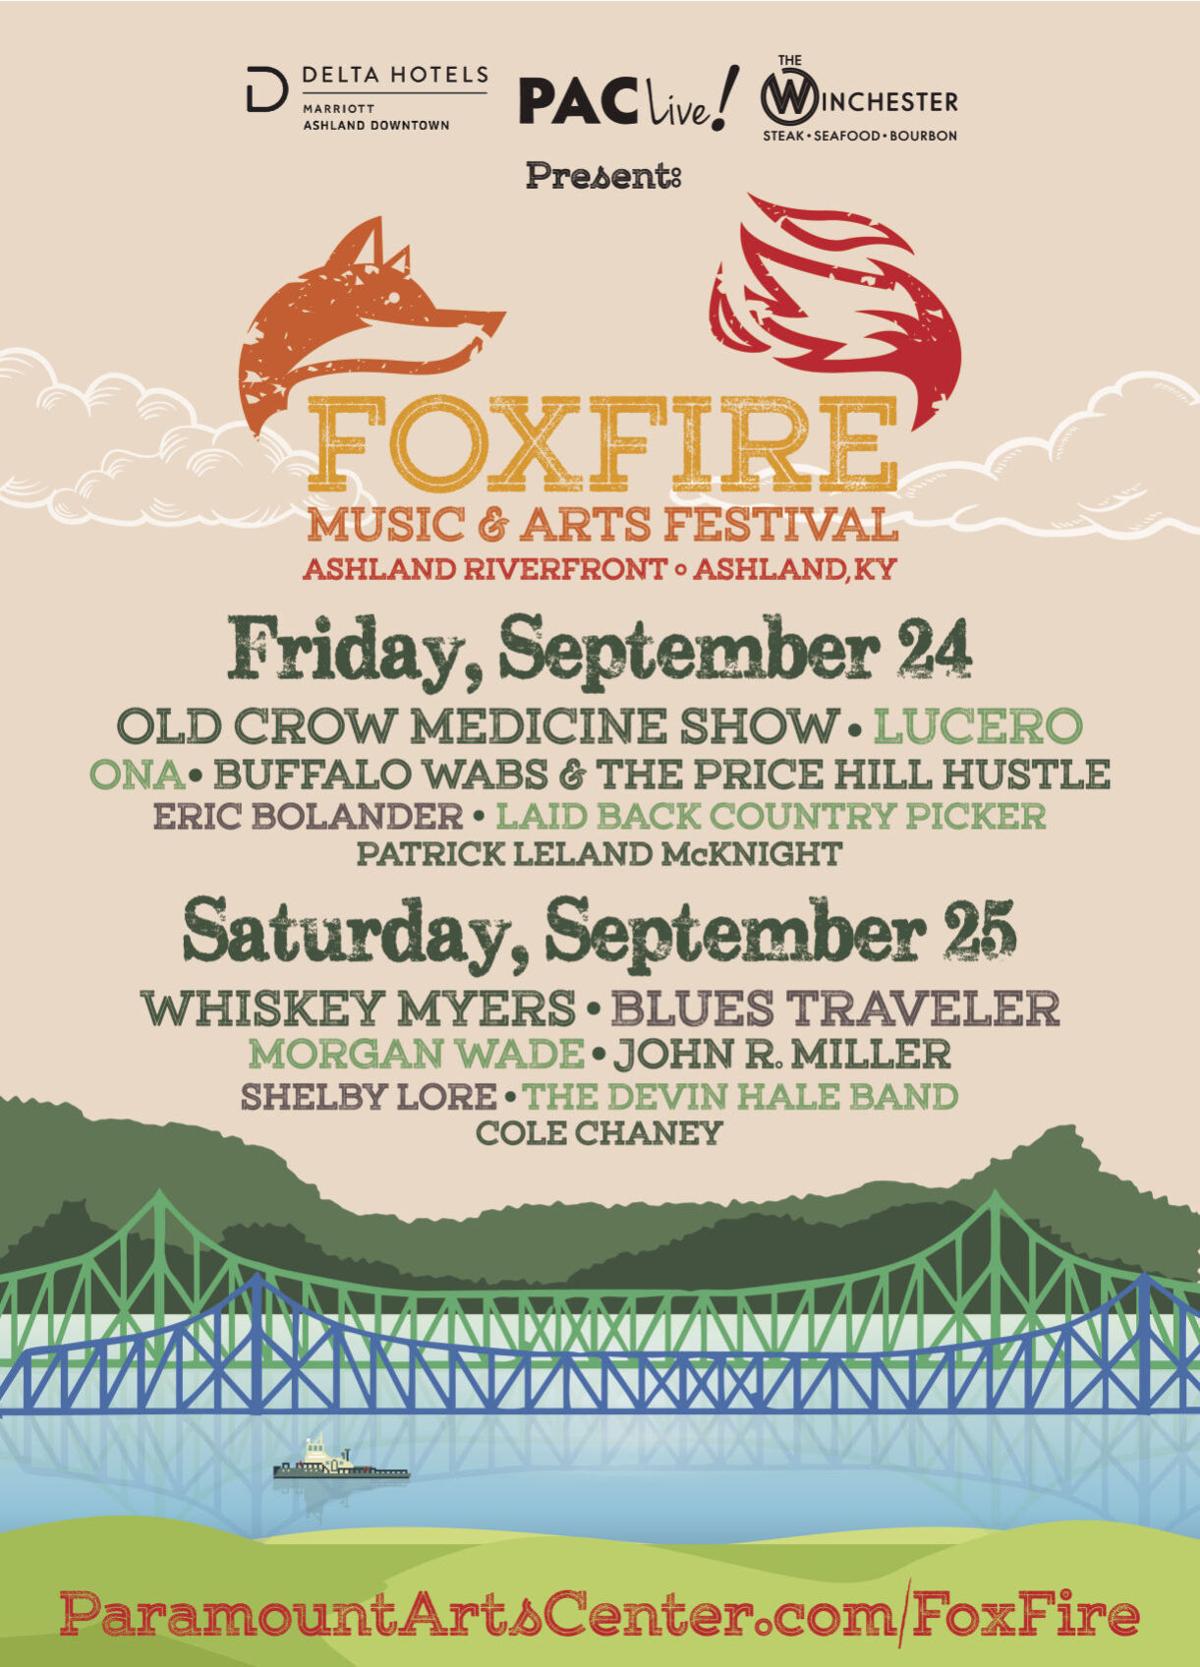 Autumn kicks into high gear with outdoor Foxfire Music Festival in